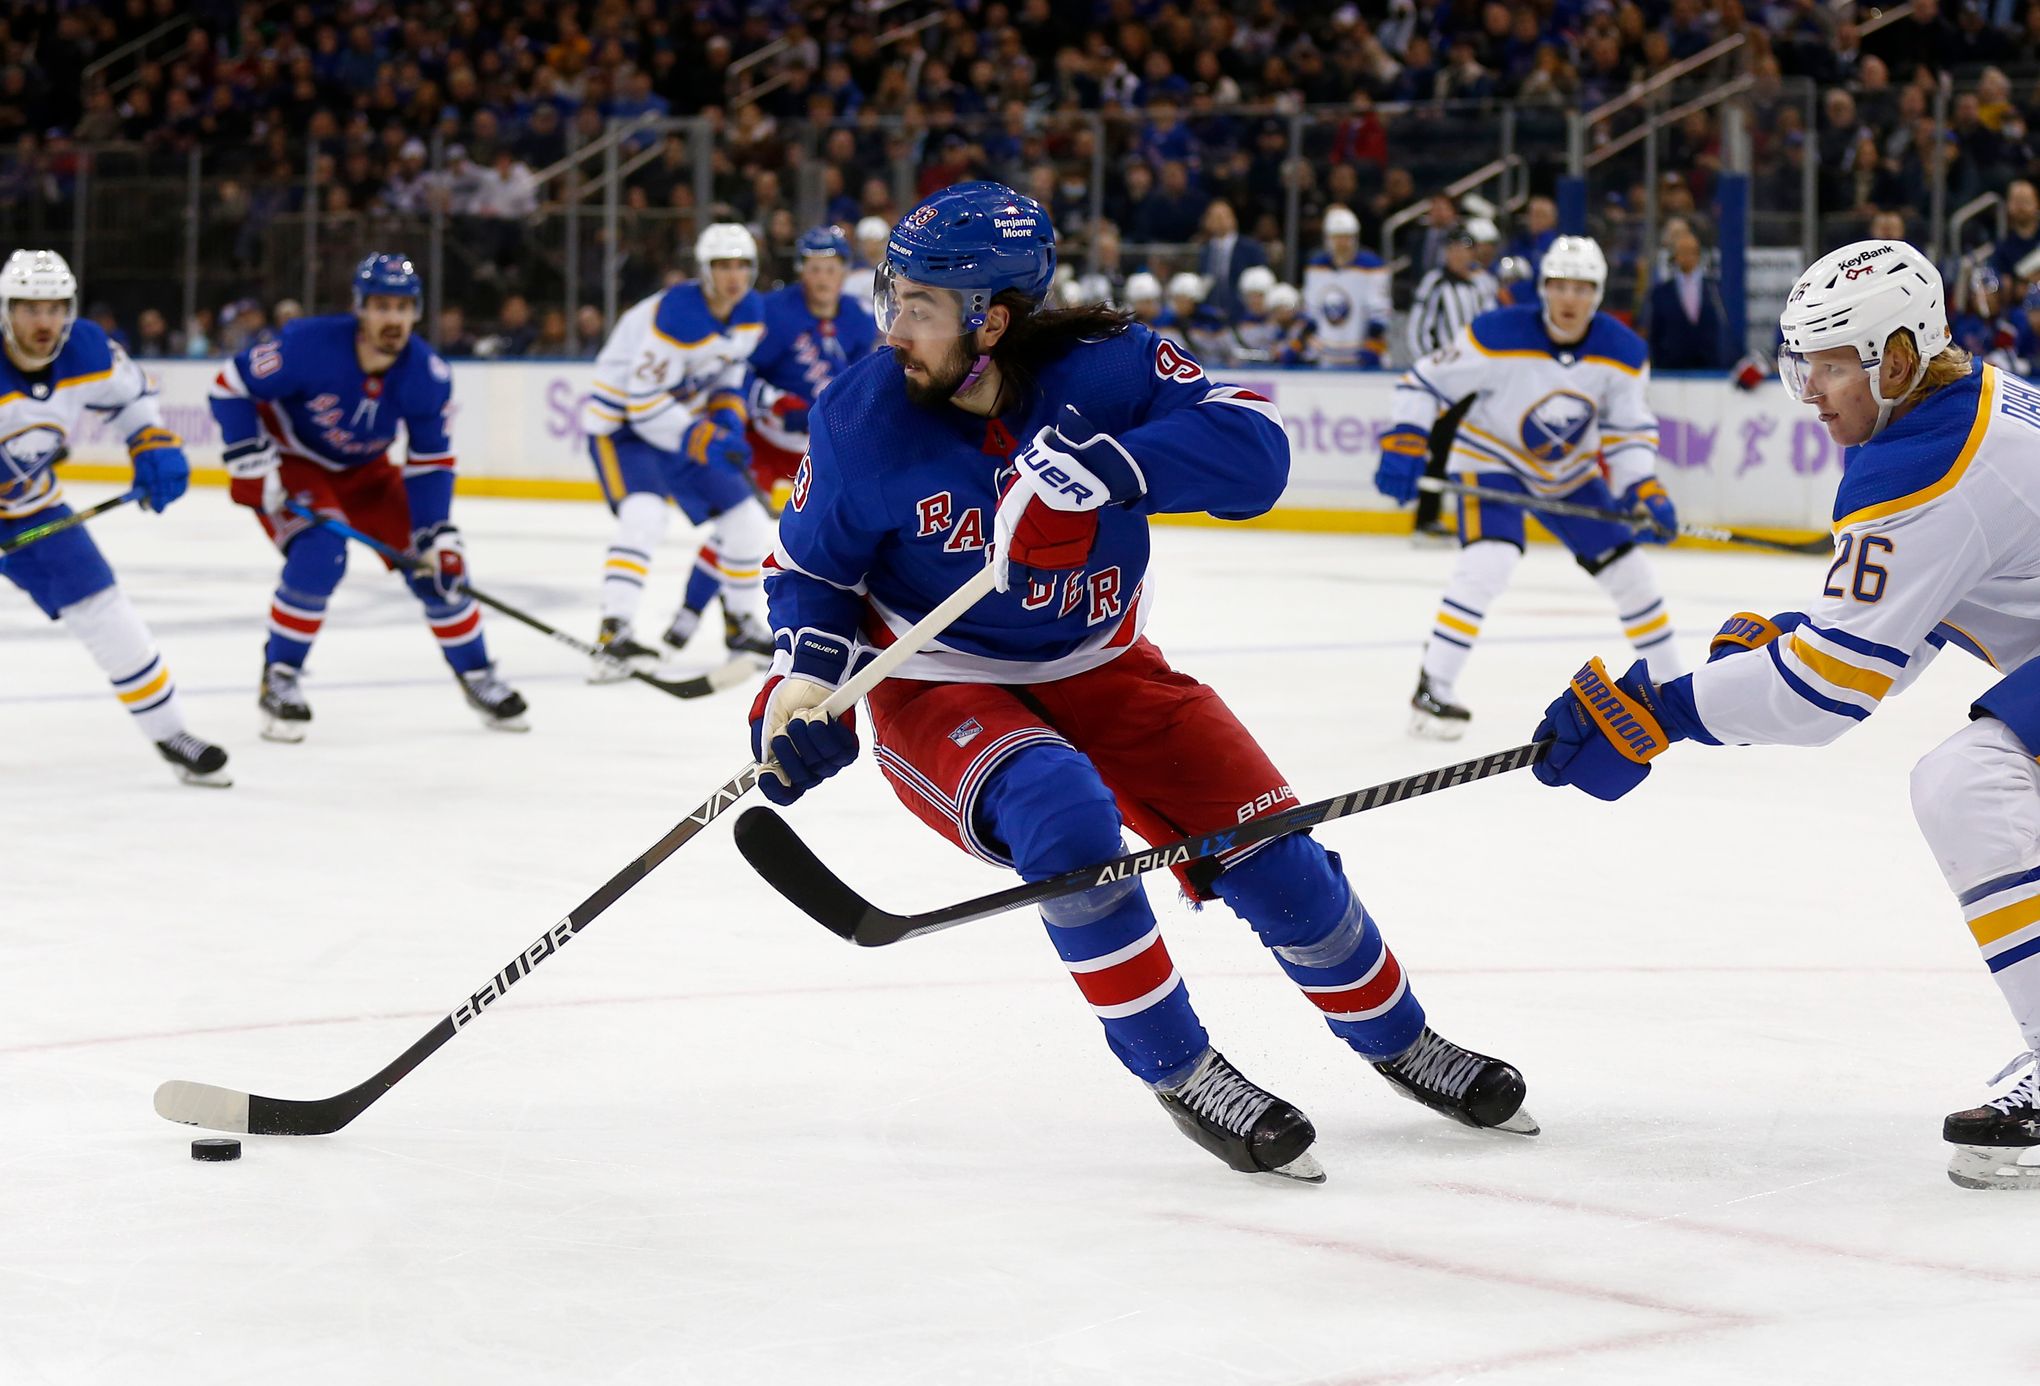 A wild last second 5-4 win for the New York Rangers over the Sabres